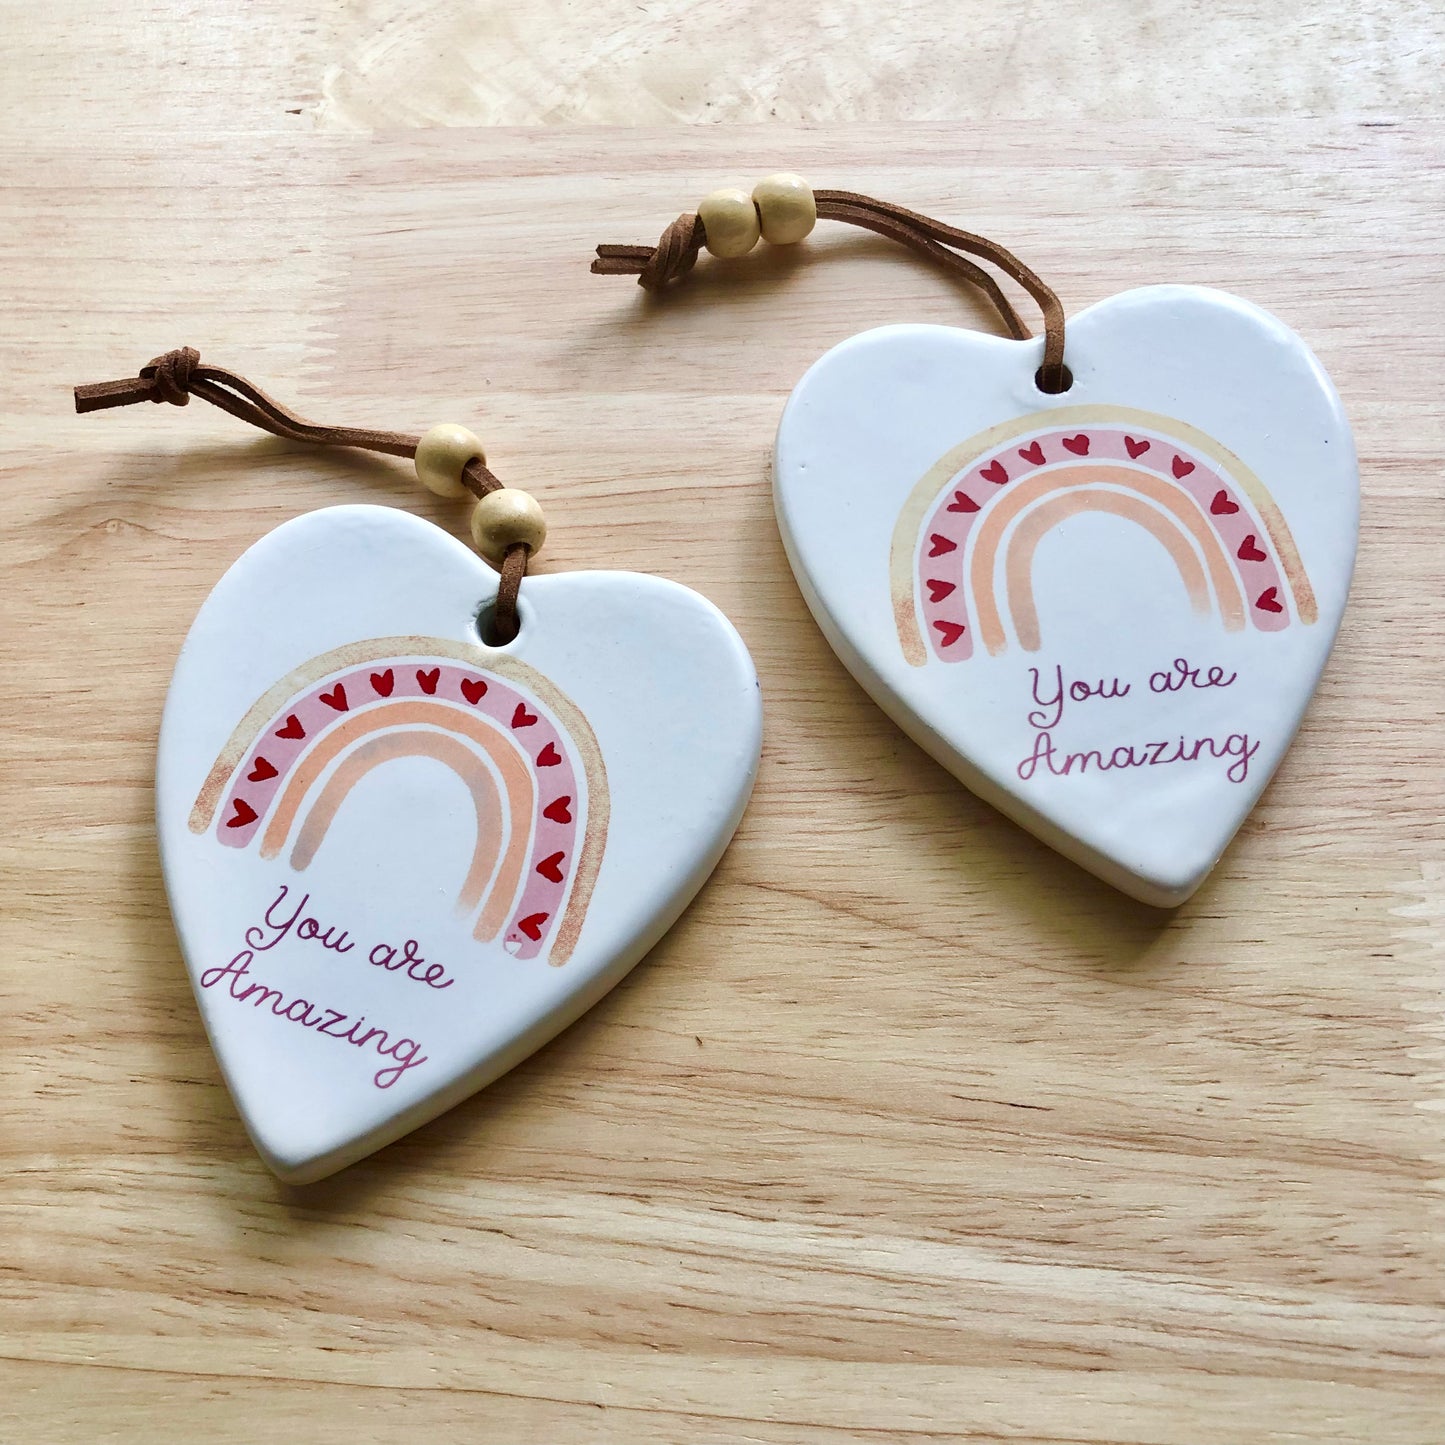 You are amazing heart ceramic tag